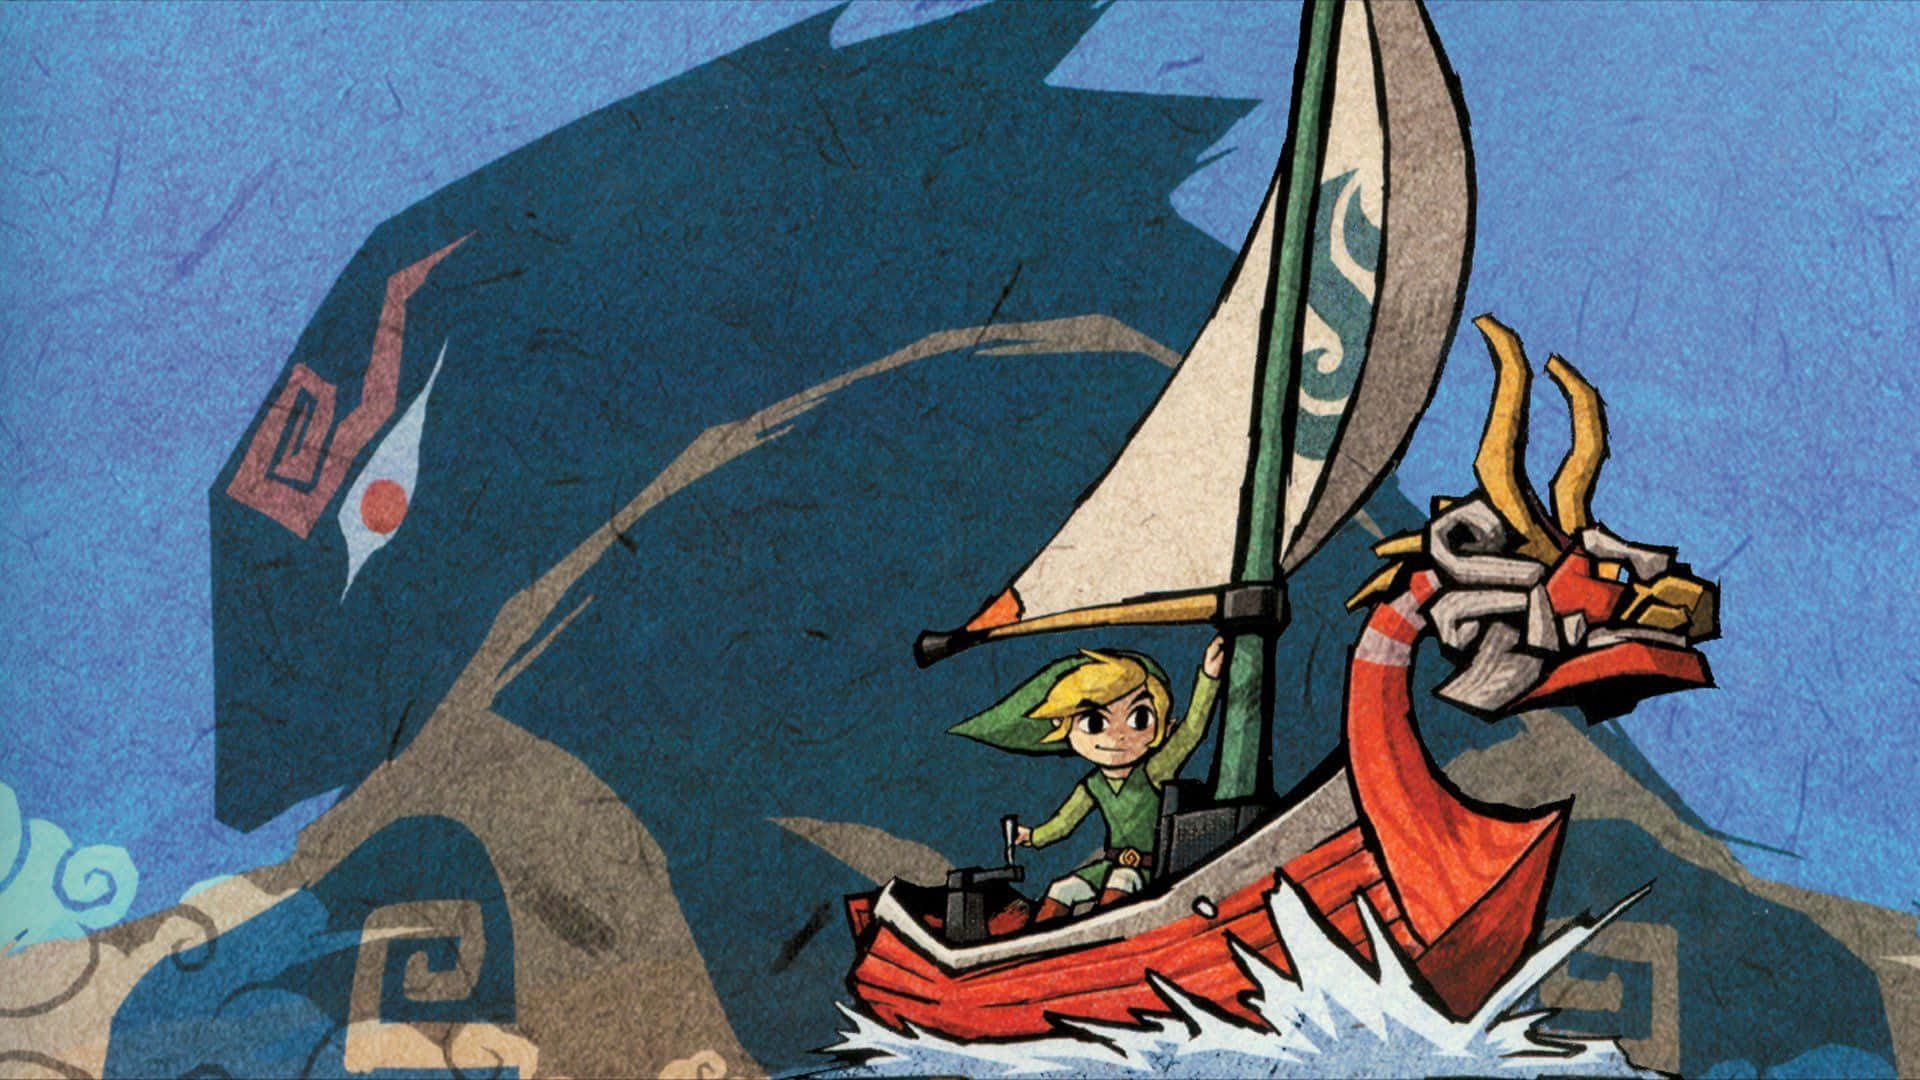 The Legend of Zelda: The Wind Waker - Link and his boat embark on an adventure Wallpaper